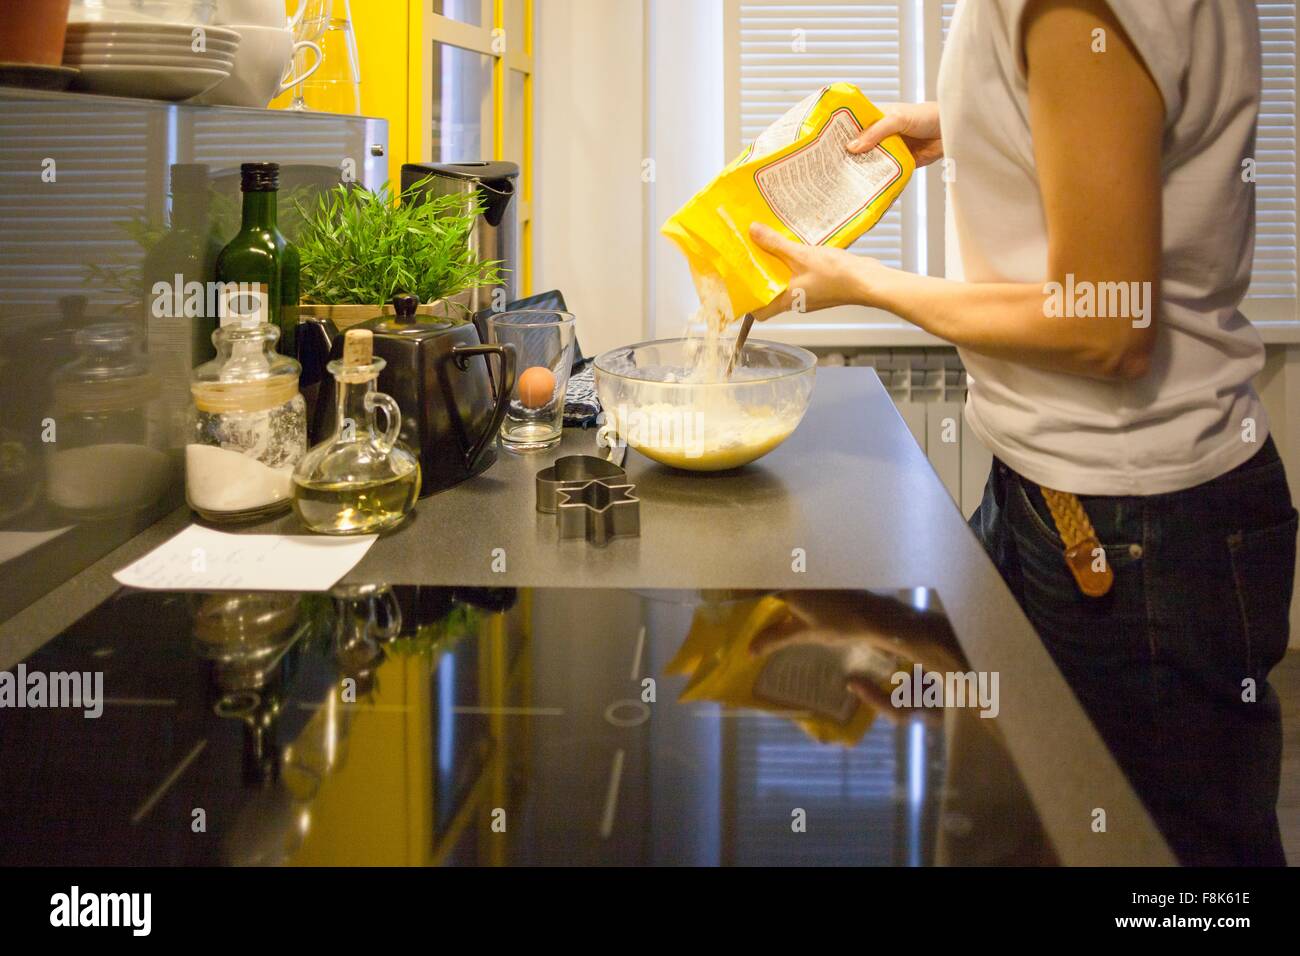 Mid adult woman pouring flour into mixing bowl at kitchen counter Stock Photo